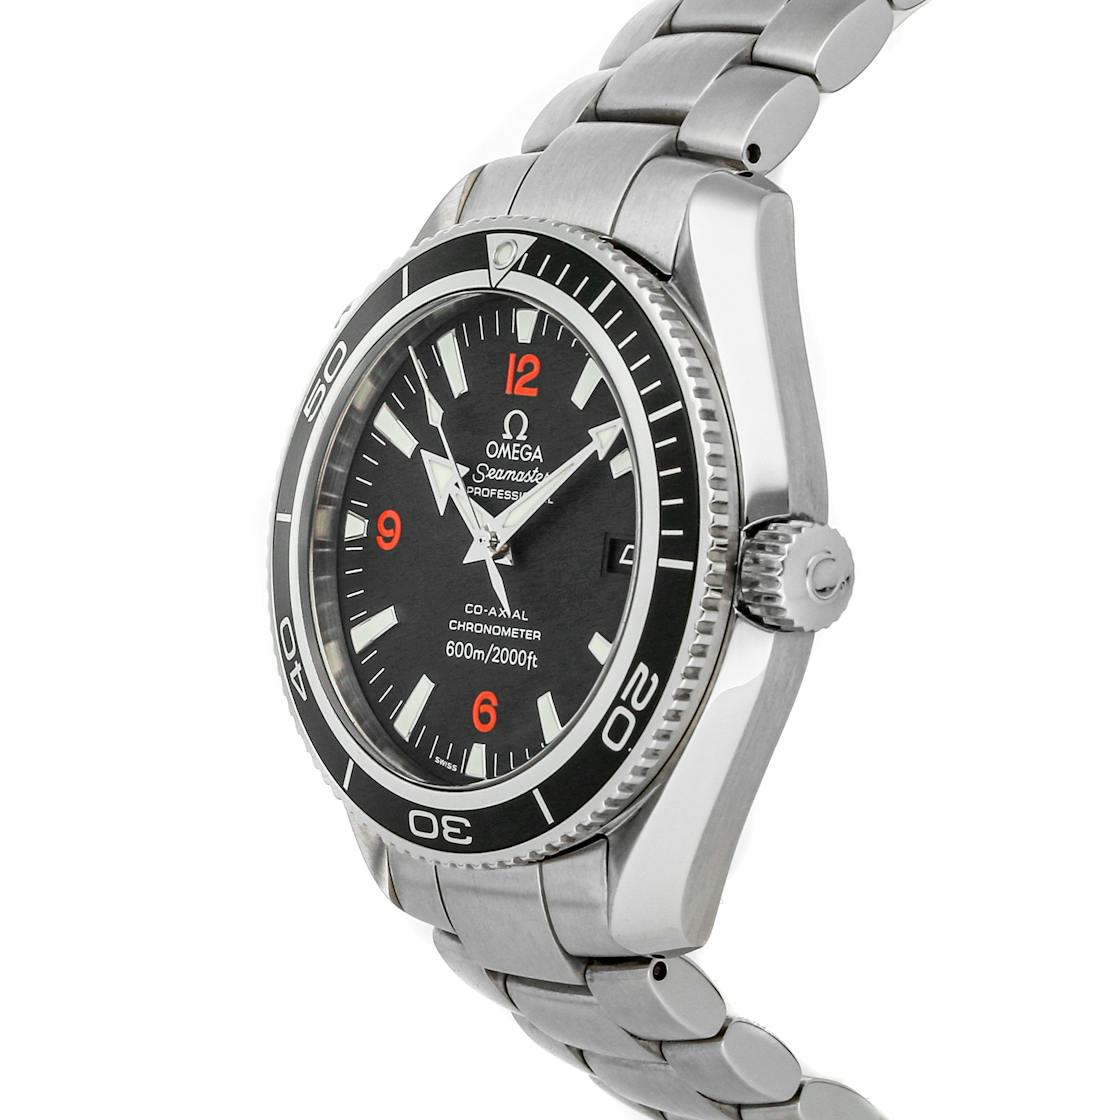 Pre-Owned Omega Seamaster Planet Ocean 600m 2201.51.00